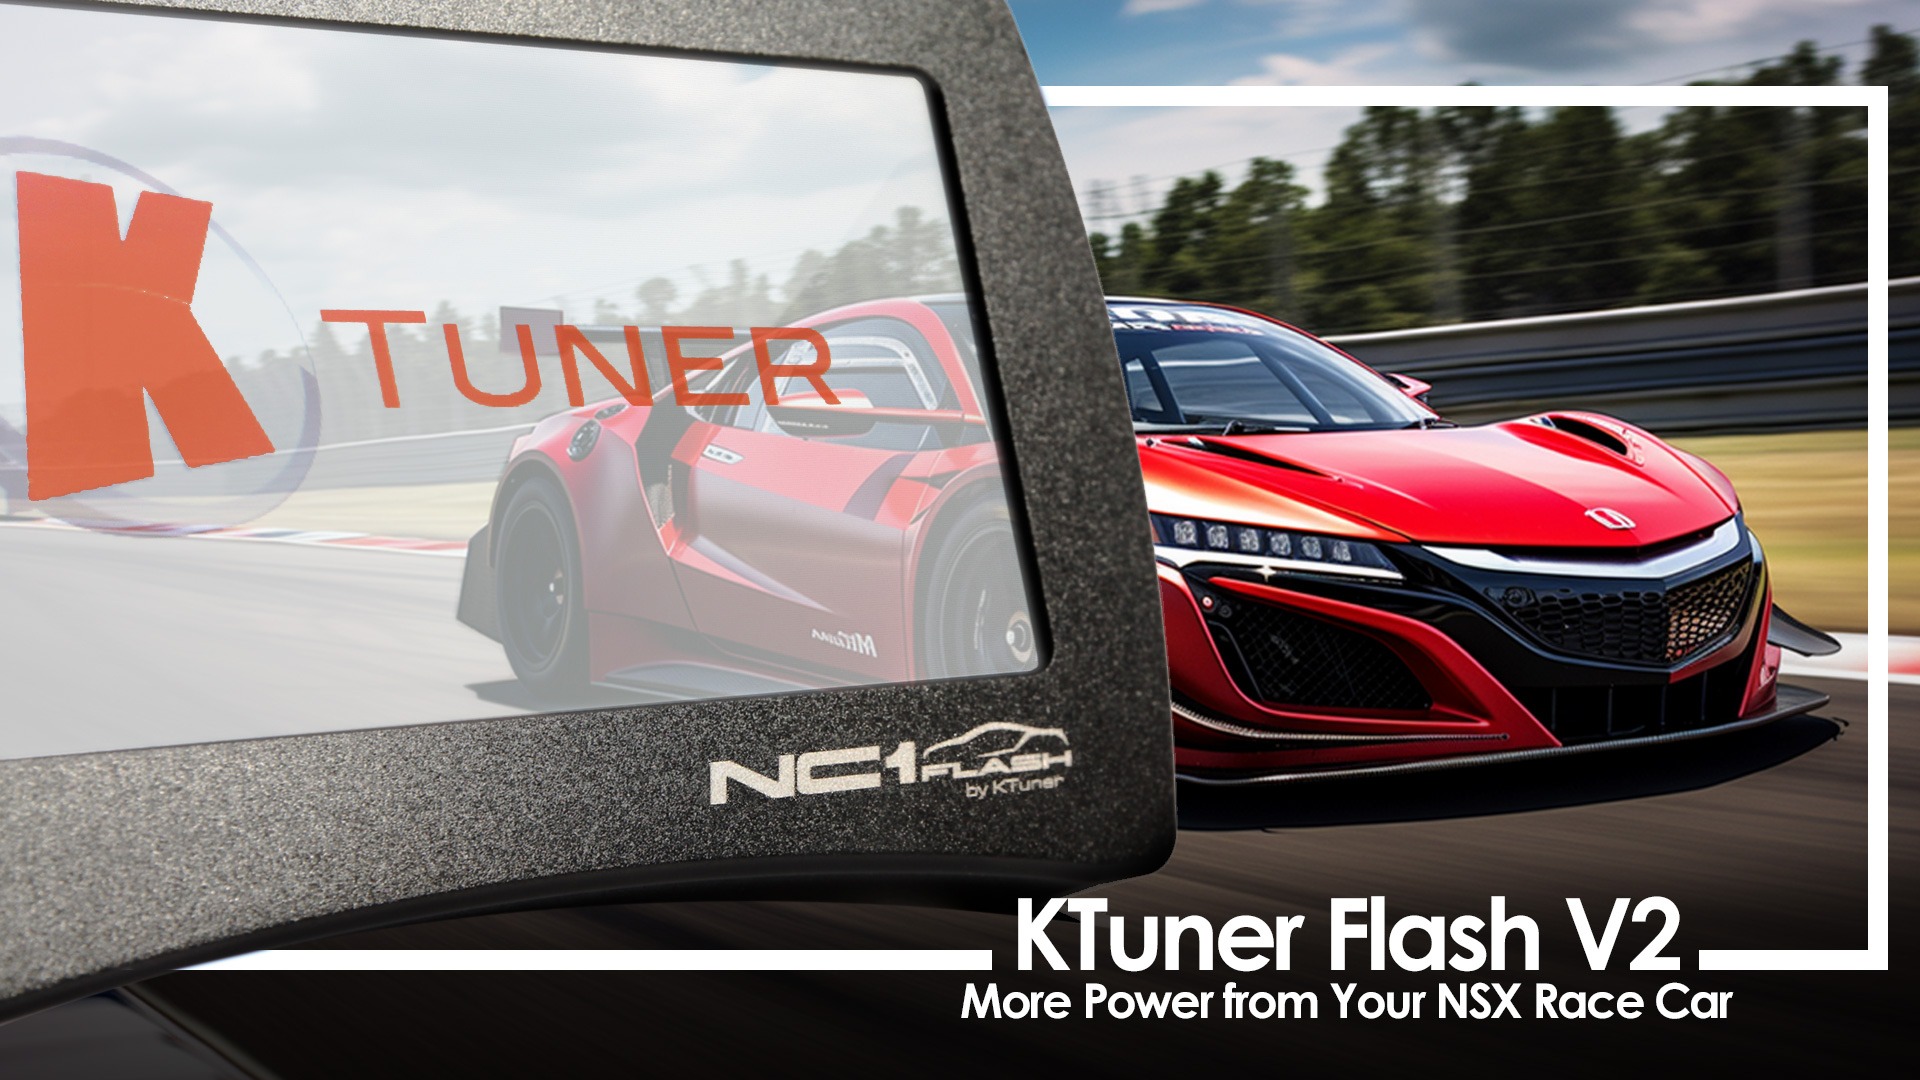 KTuner Flash V2 Touch Frequently Asked Questions